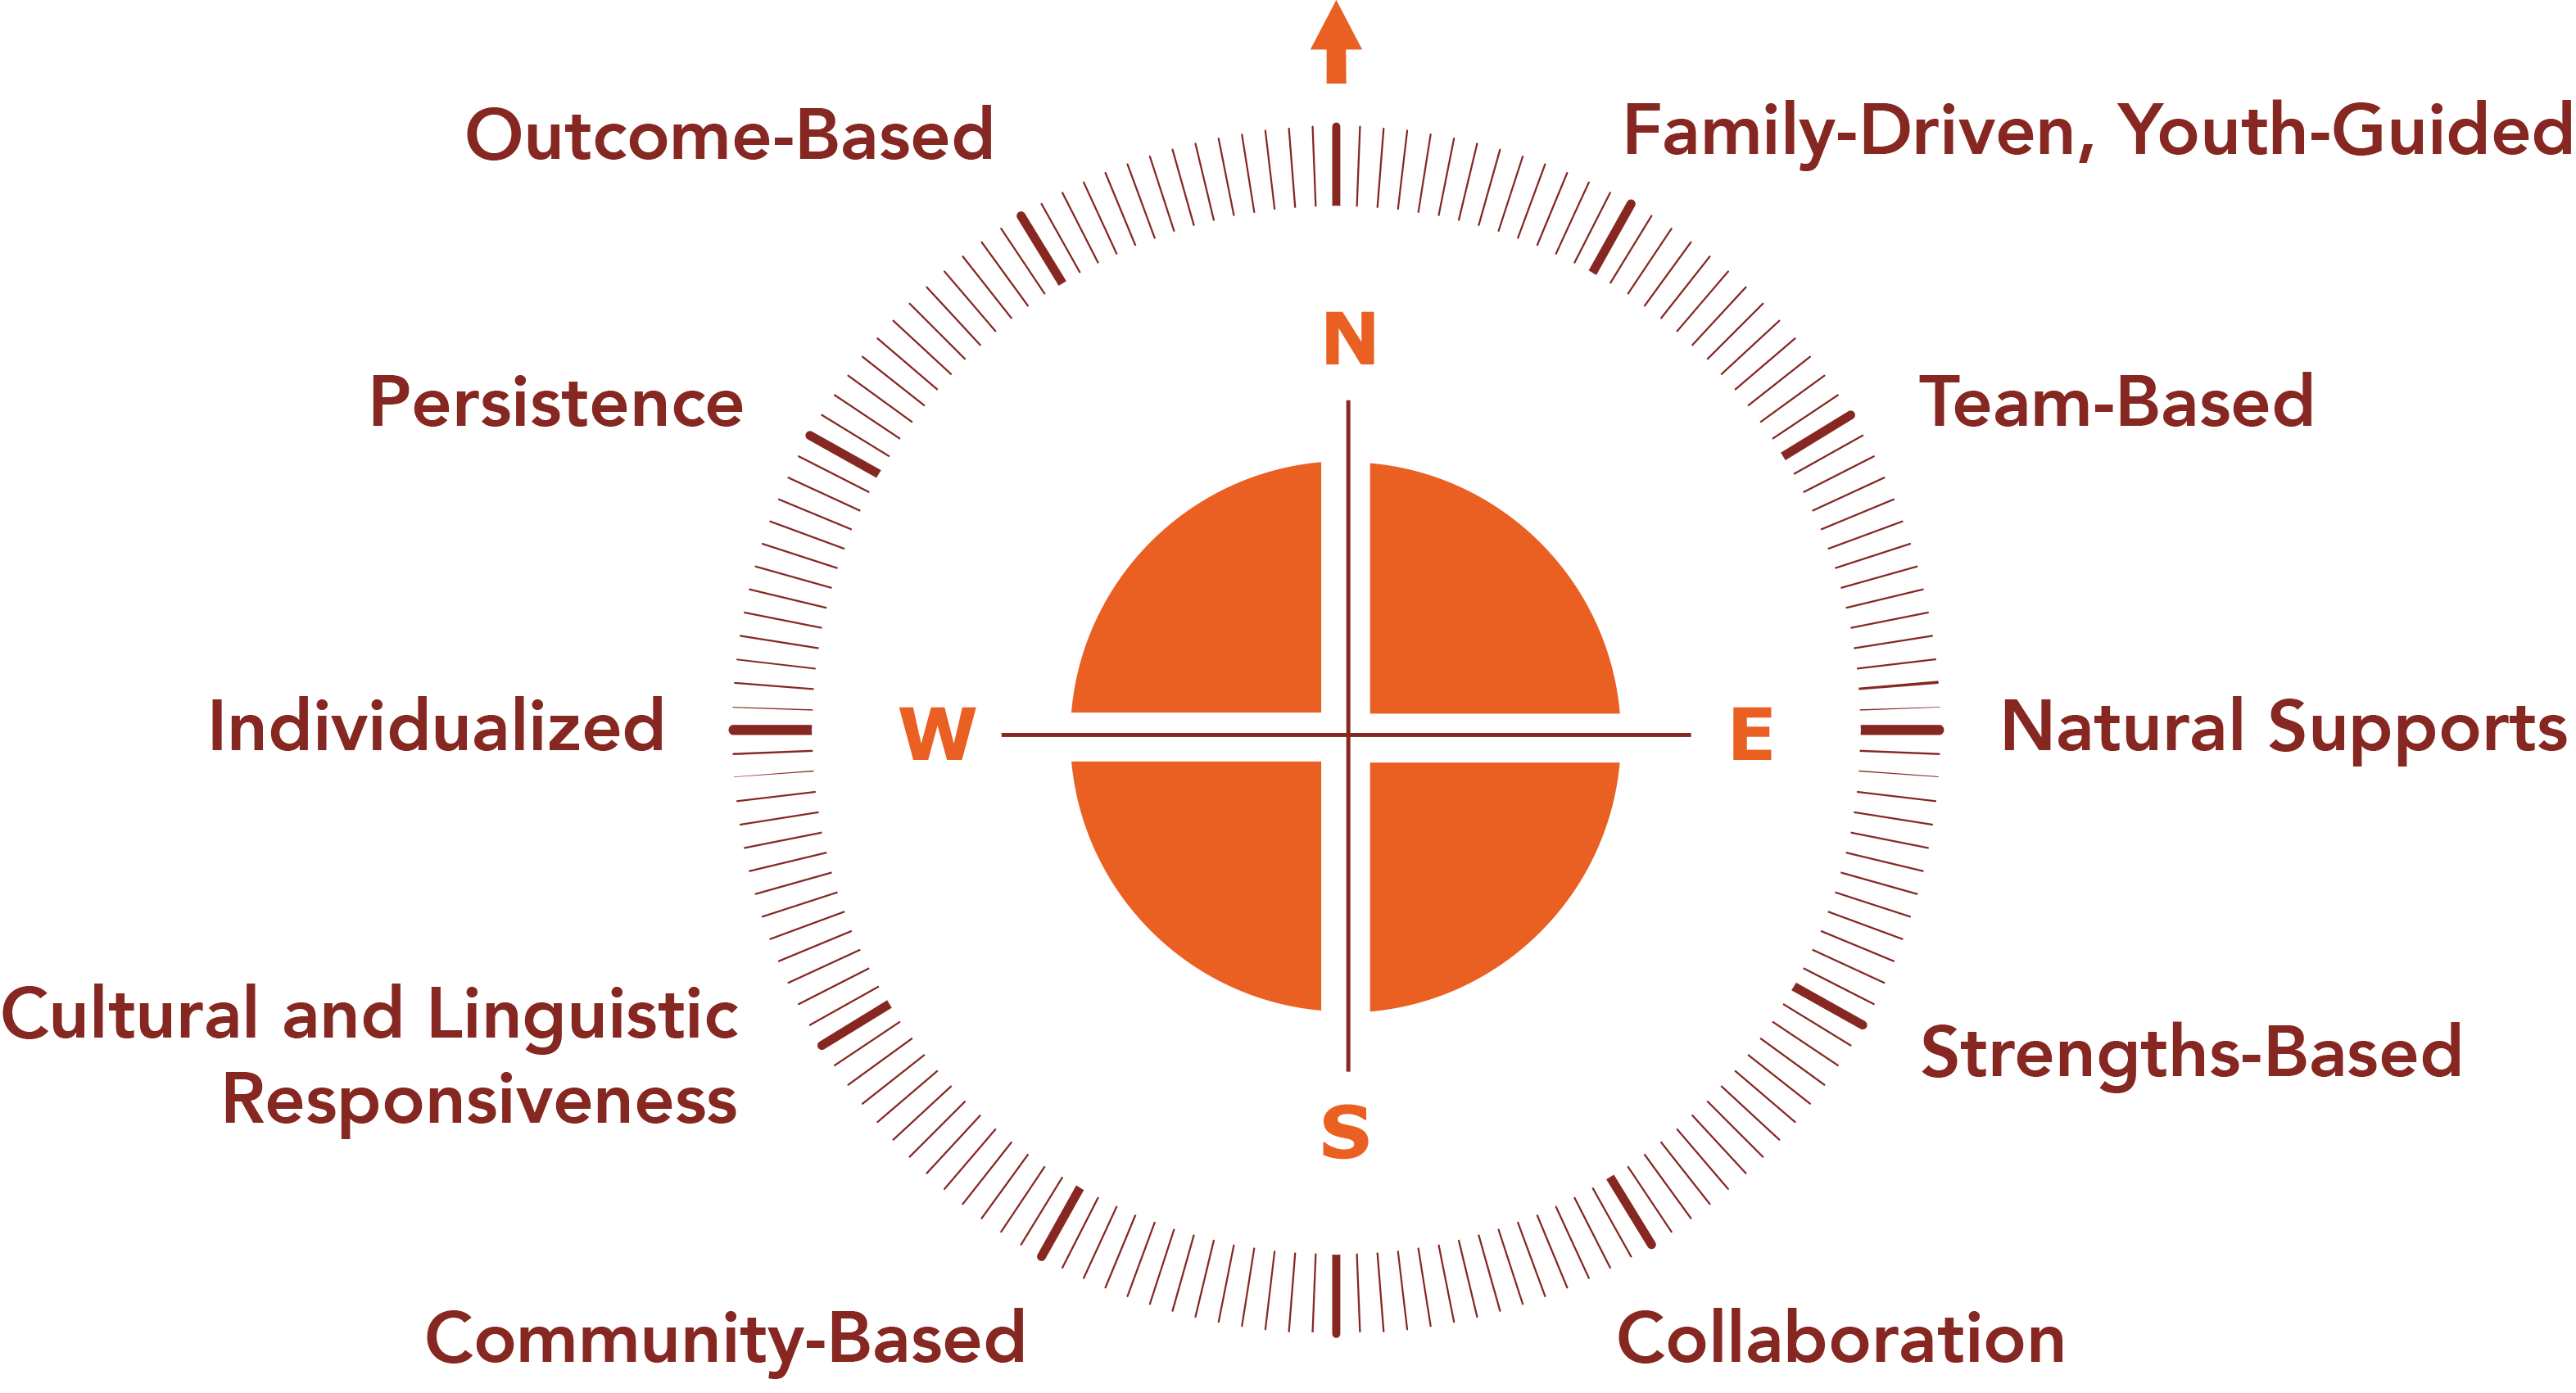 A compass with points outlining the values of Wraparound. The values include: outcome-based, persistence, individualized, cultural and linguistic responsiveness, community-based, family-driven, youth-guided, team-based, natural supports, strengths-based, collaboration.